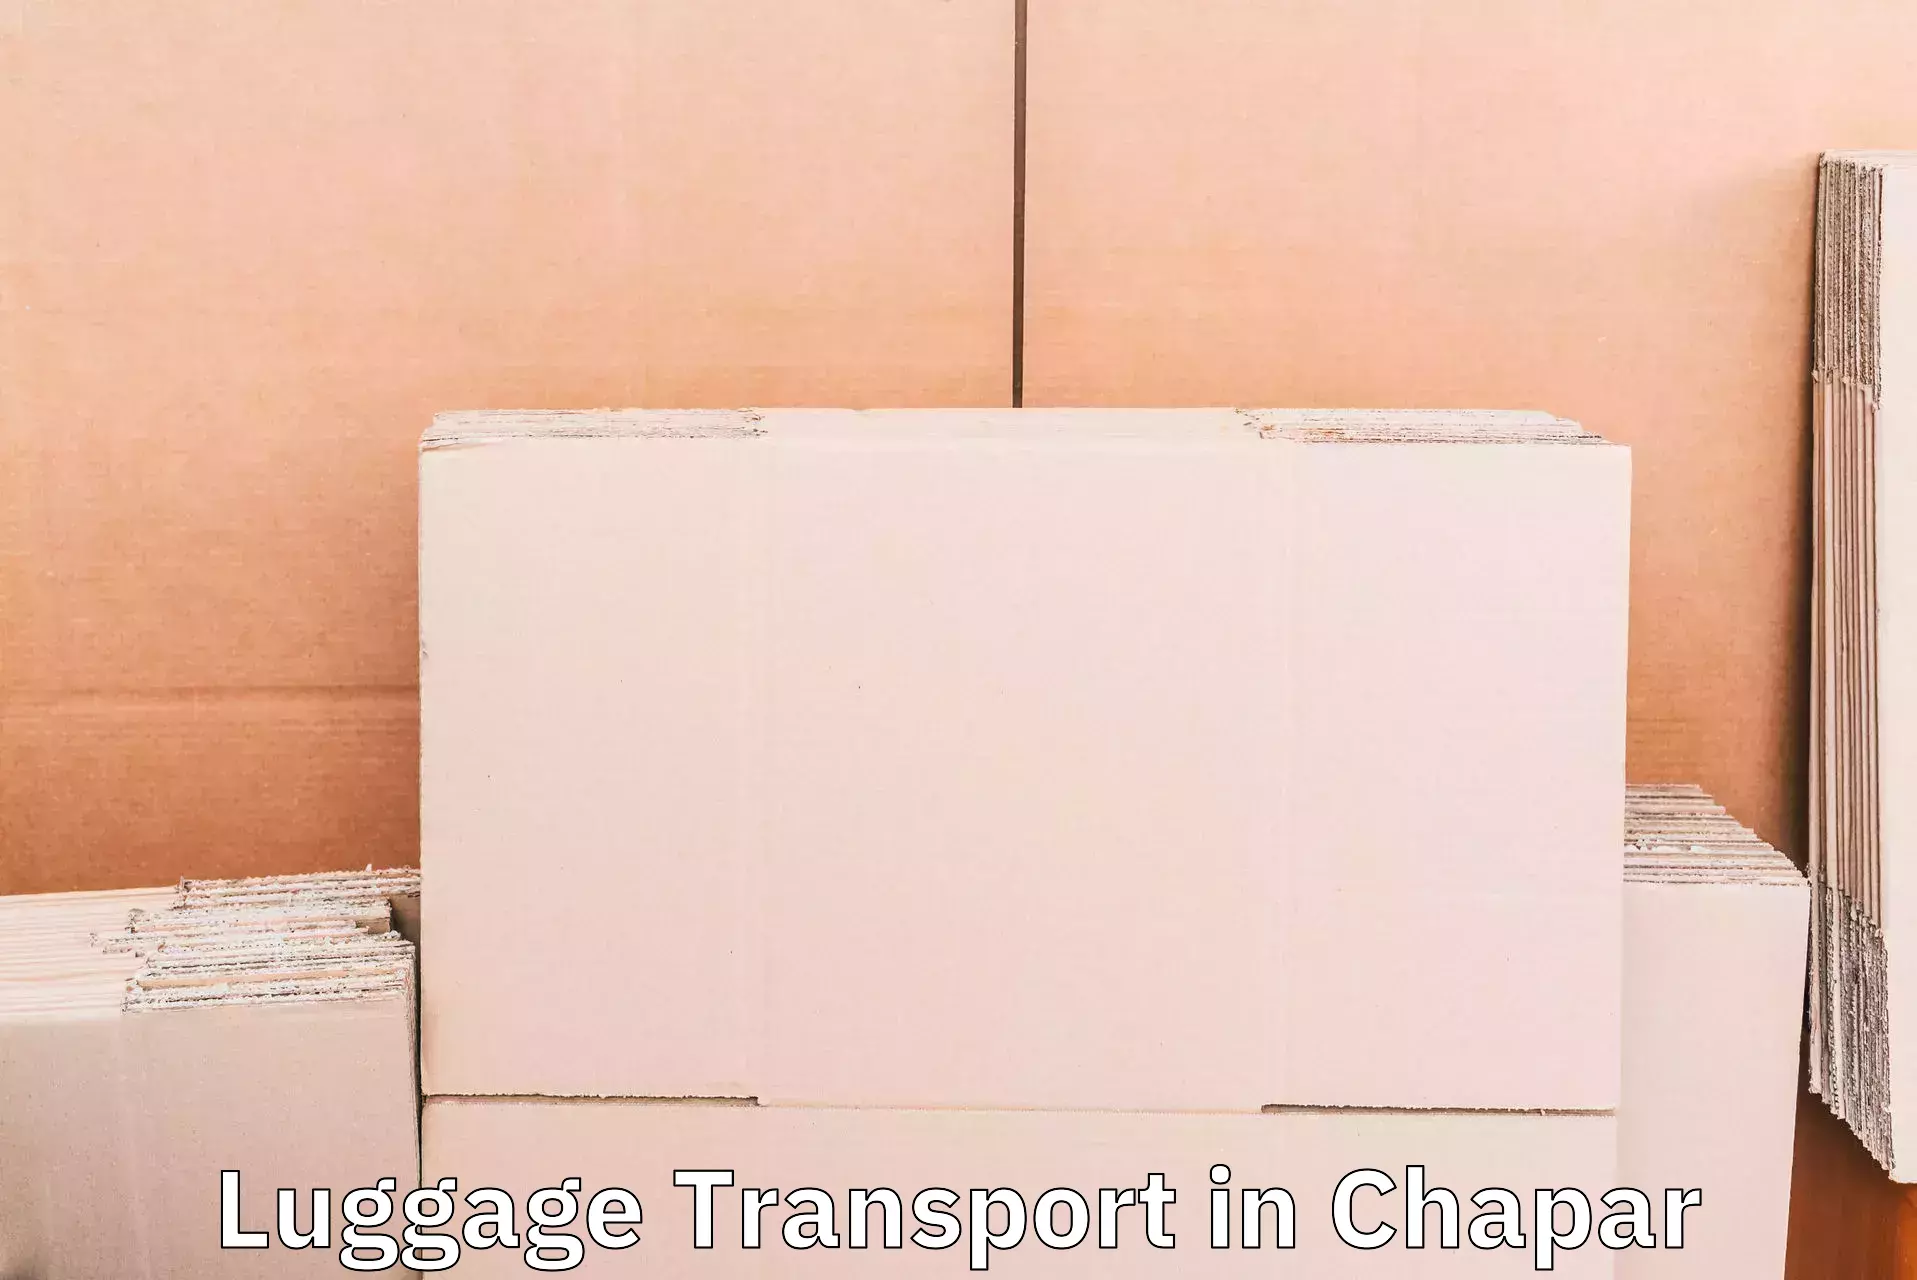 Luggage transport operations in Chapar